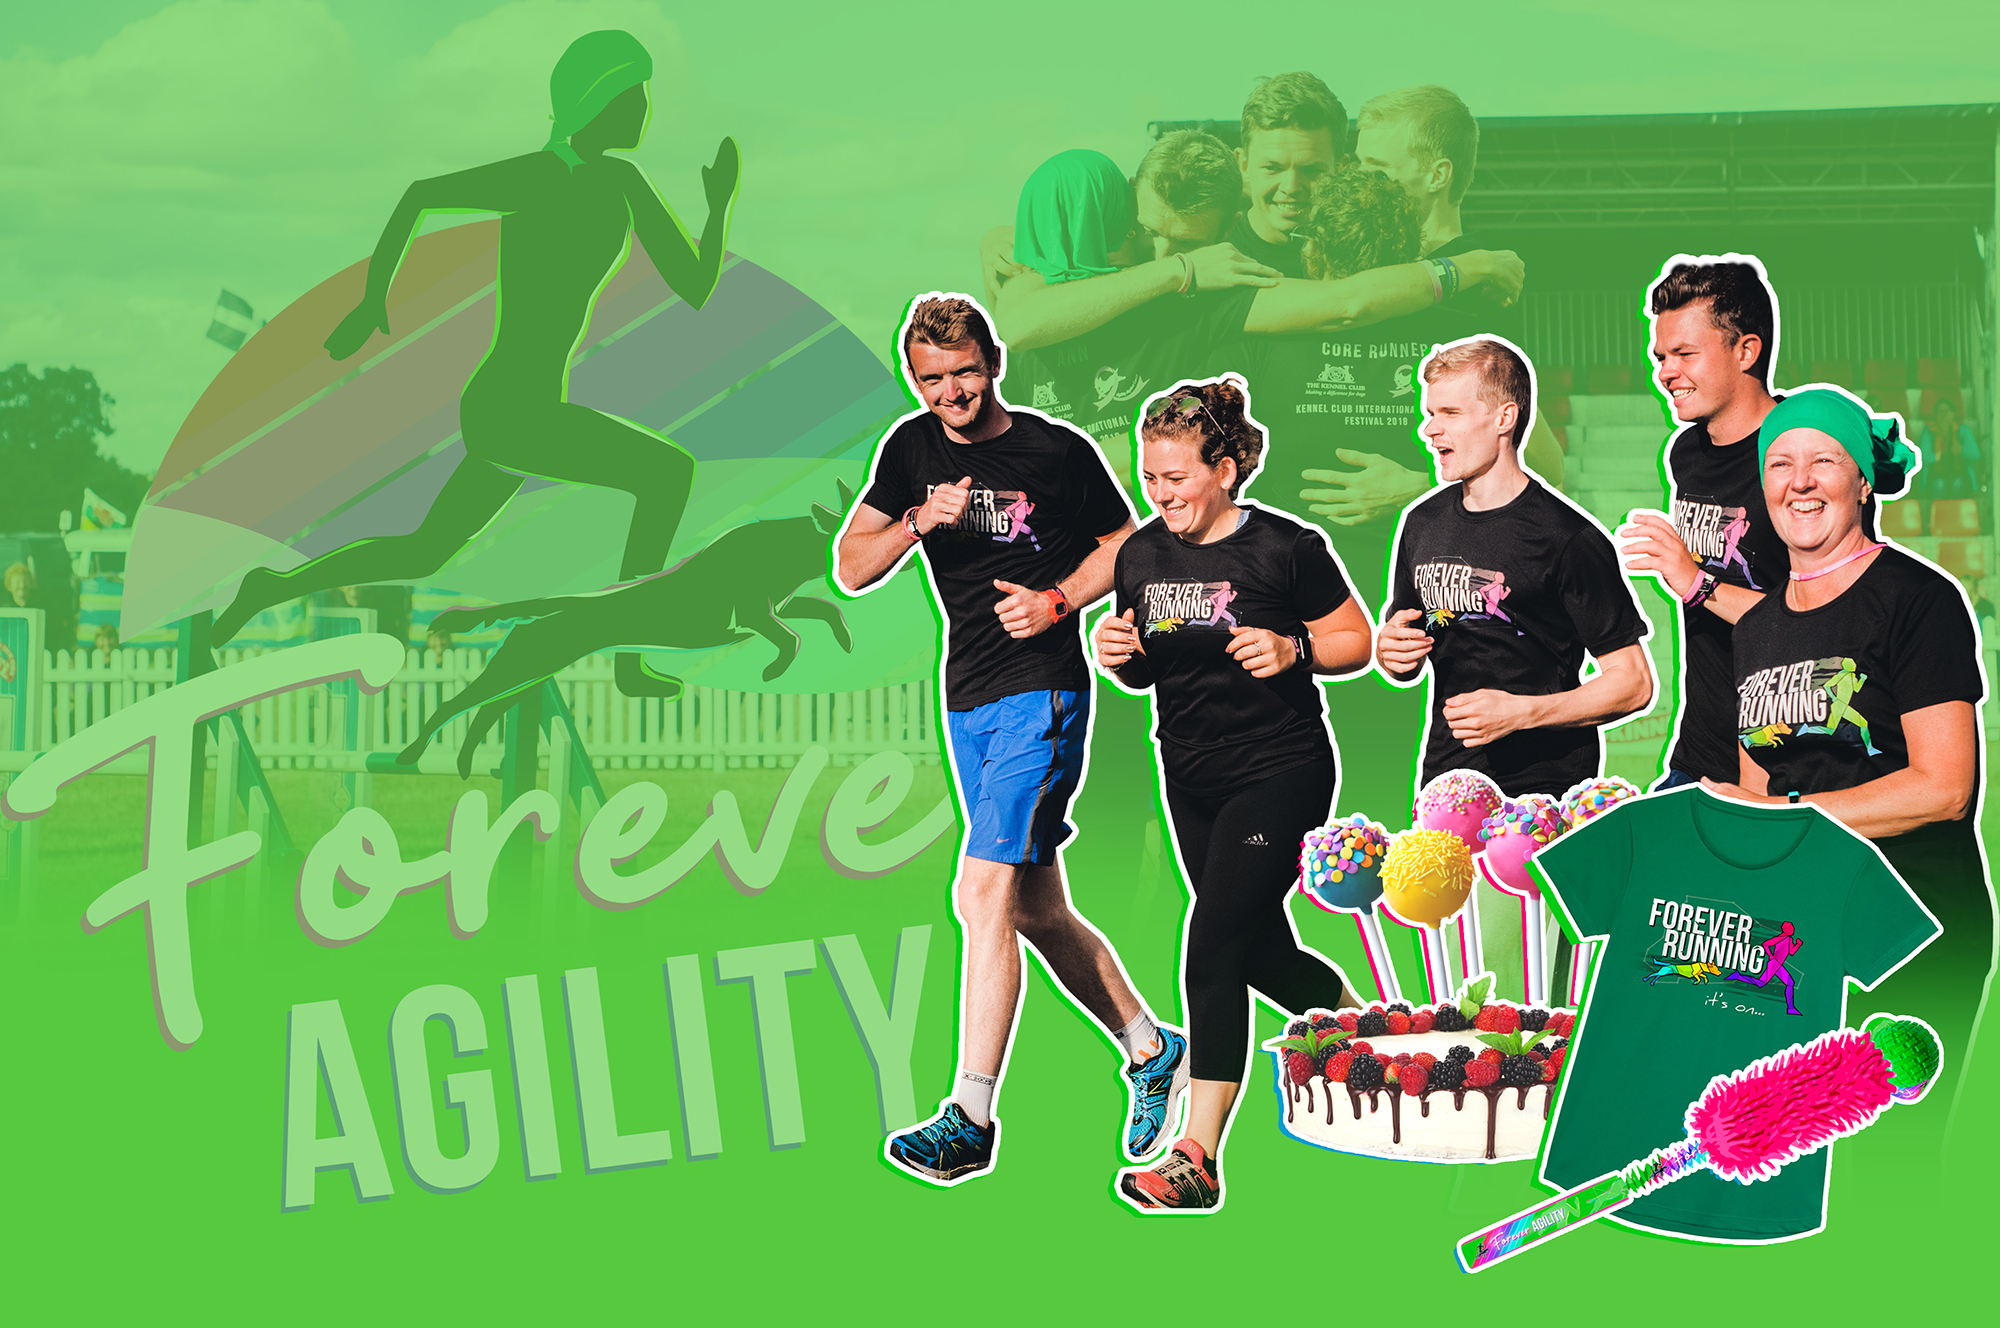 Forever Agility